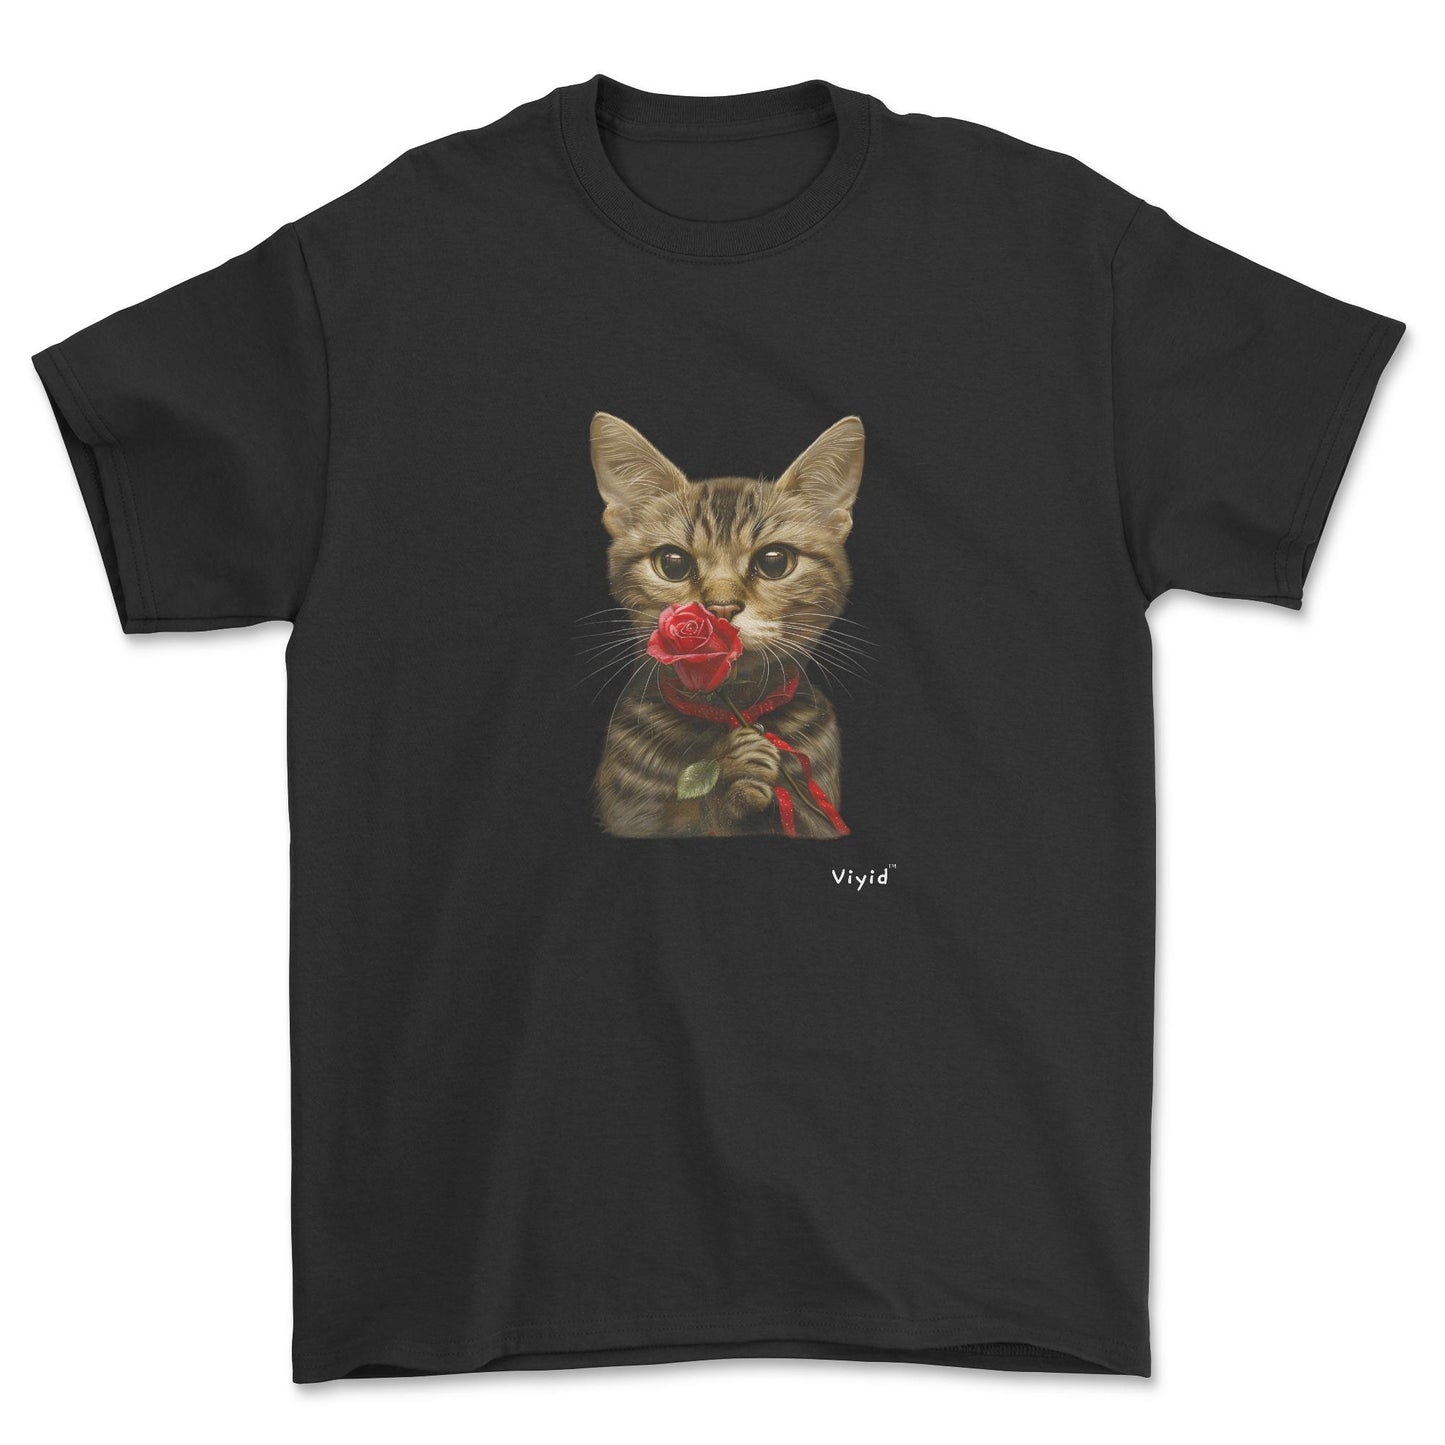 sniffing rose domestic shorthair cat youth t-shirt black